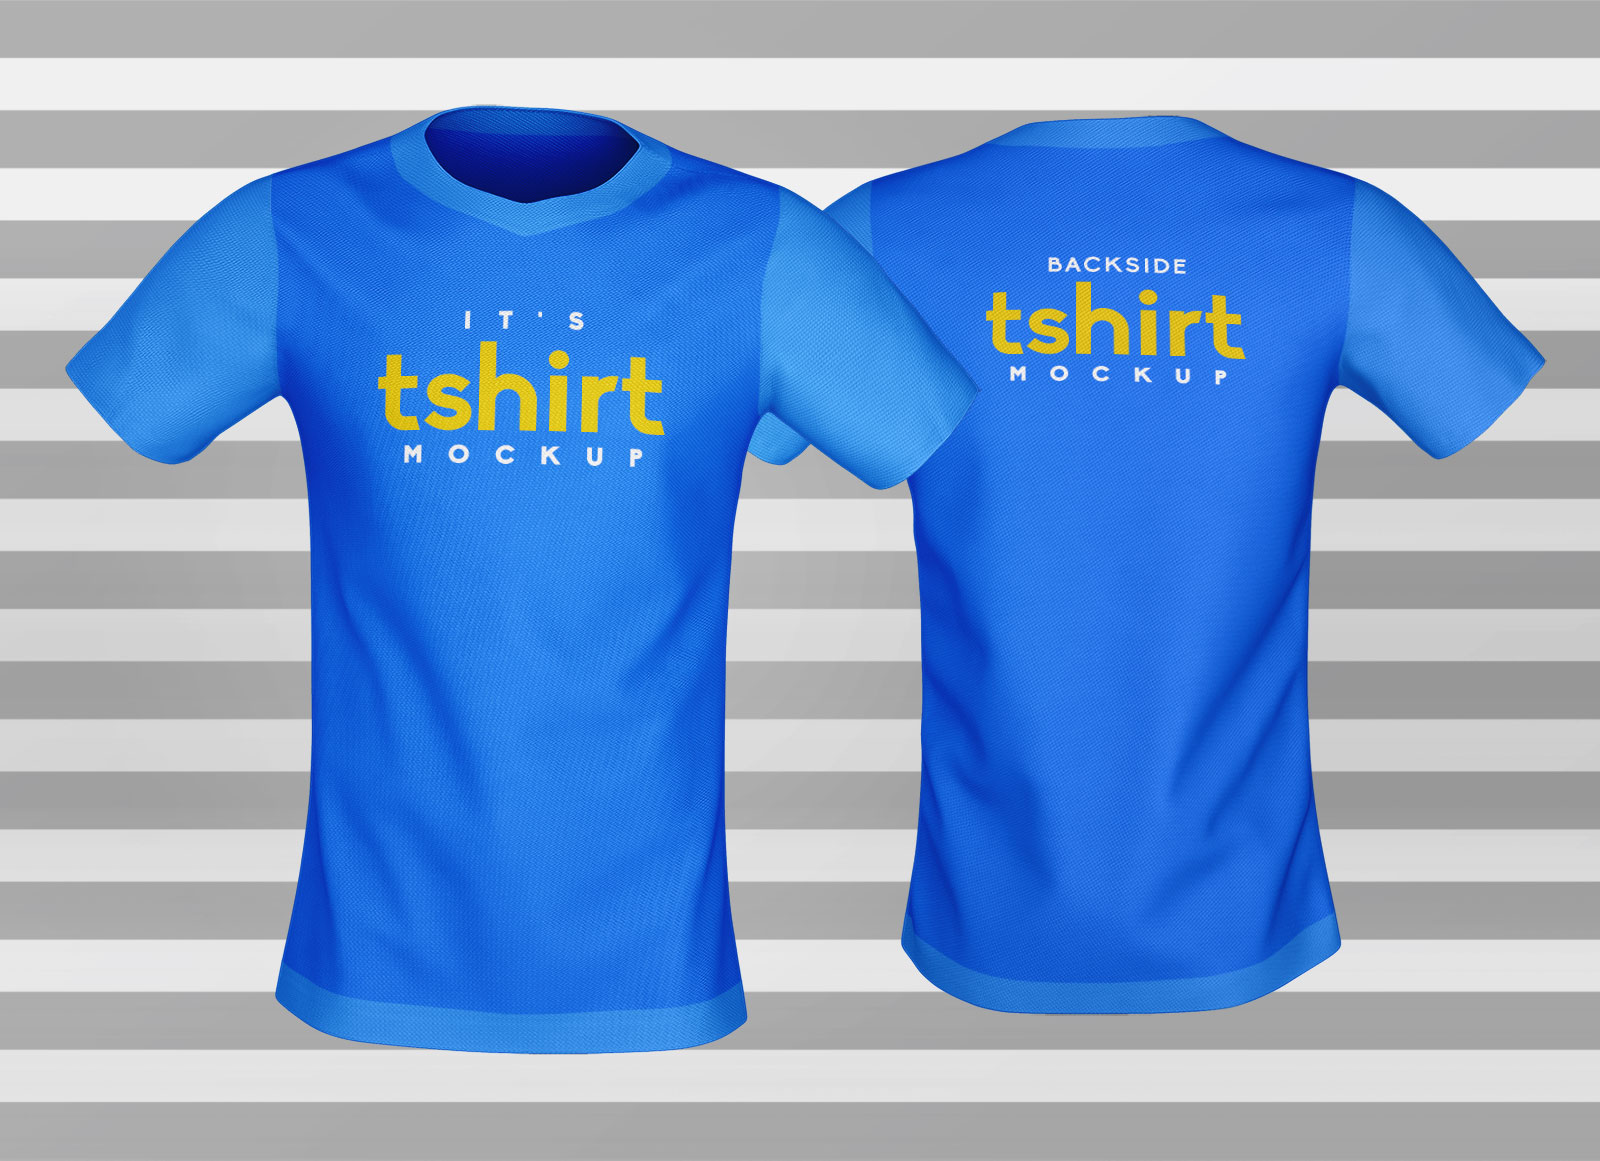 PSD Blue T-Shirt Front View Mockup